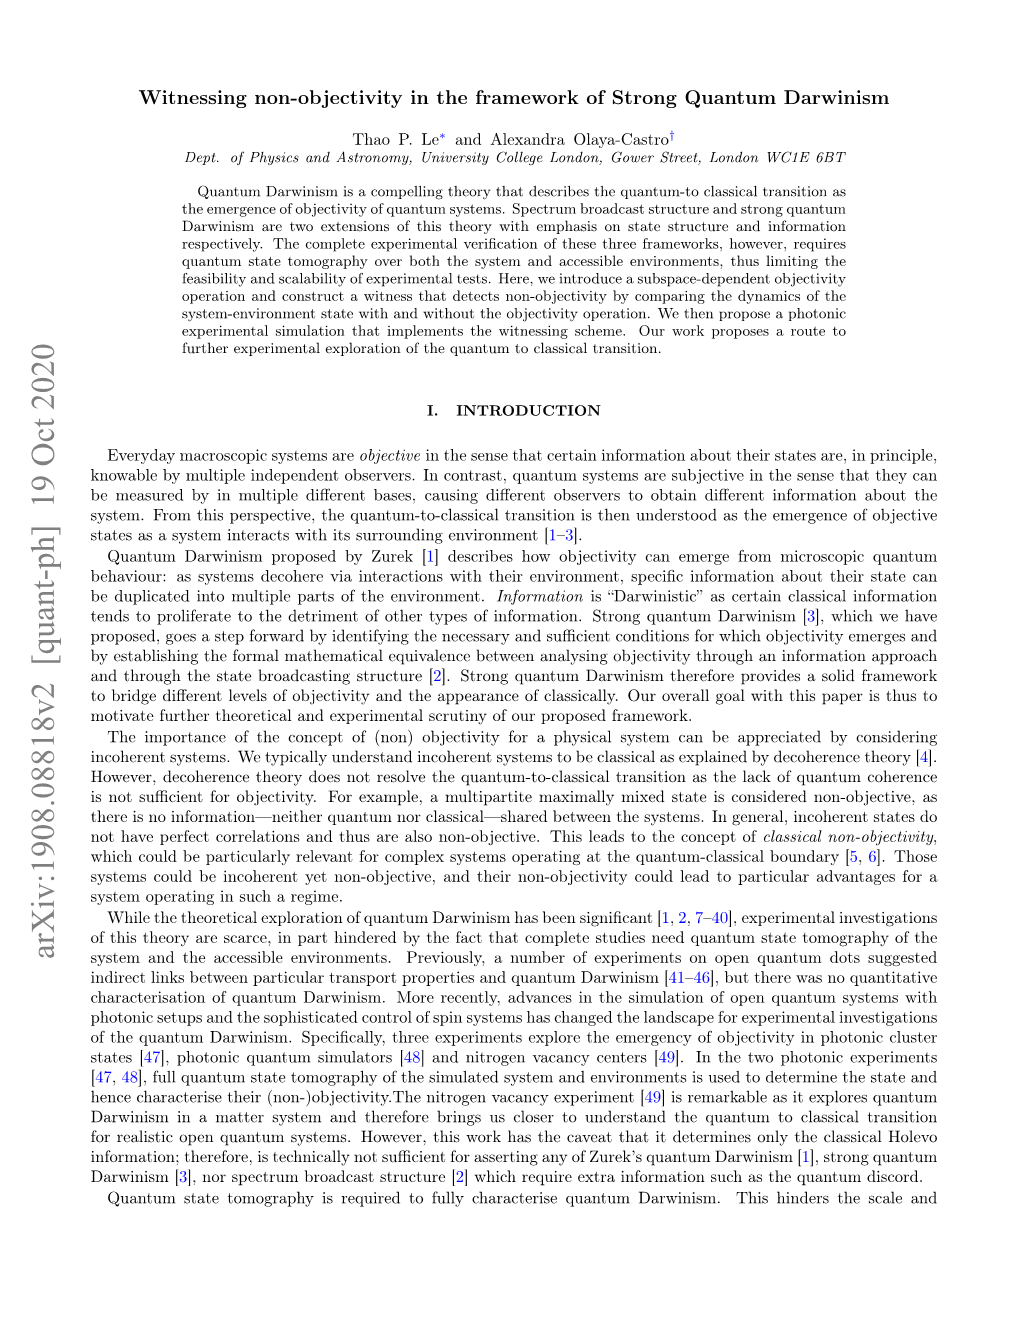 Arxiv:1908.08818V2 [Quant-Ph] 19 Oct 2020 System and the Accessible Environments